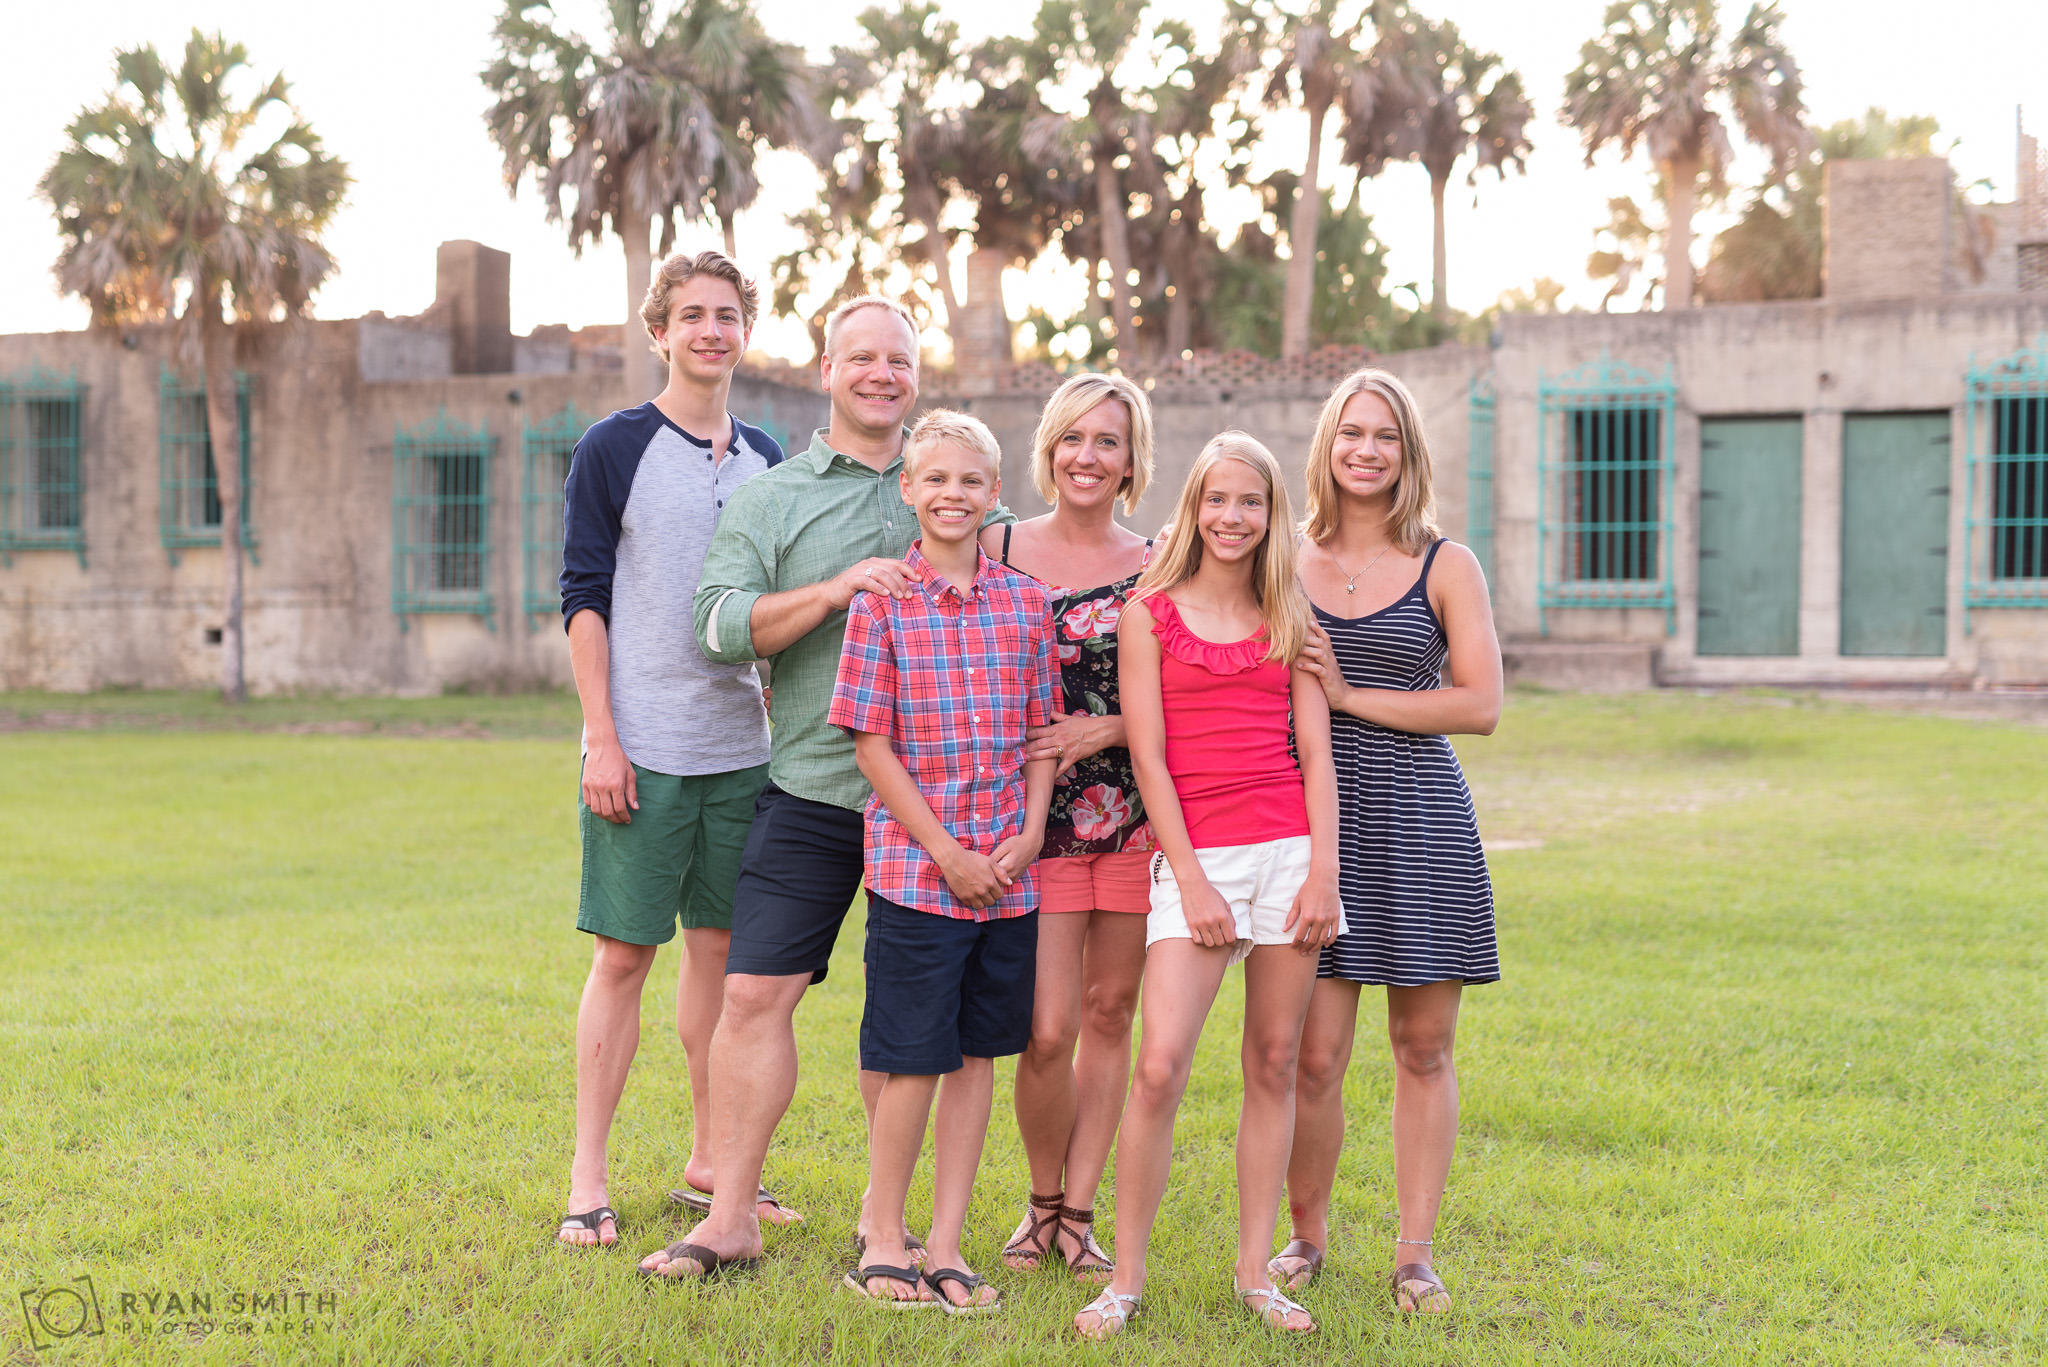 Family portrait with the Atalaya castle and palm trees in background Huntington Beach State Park